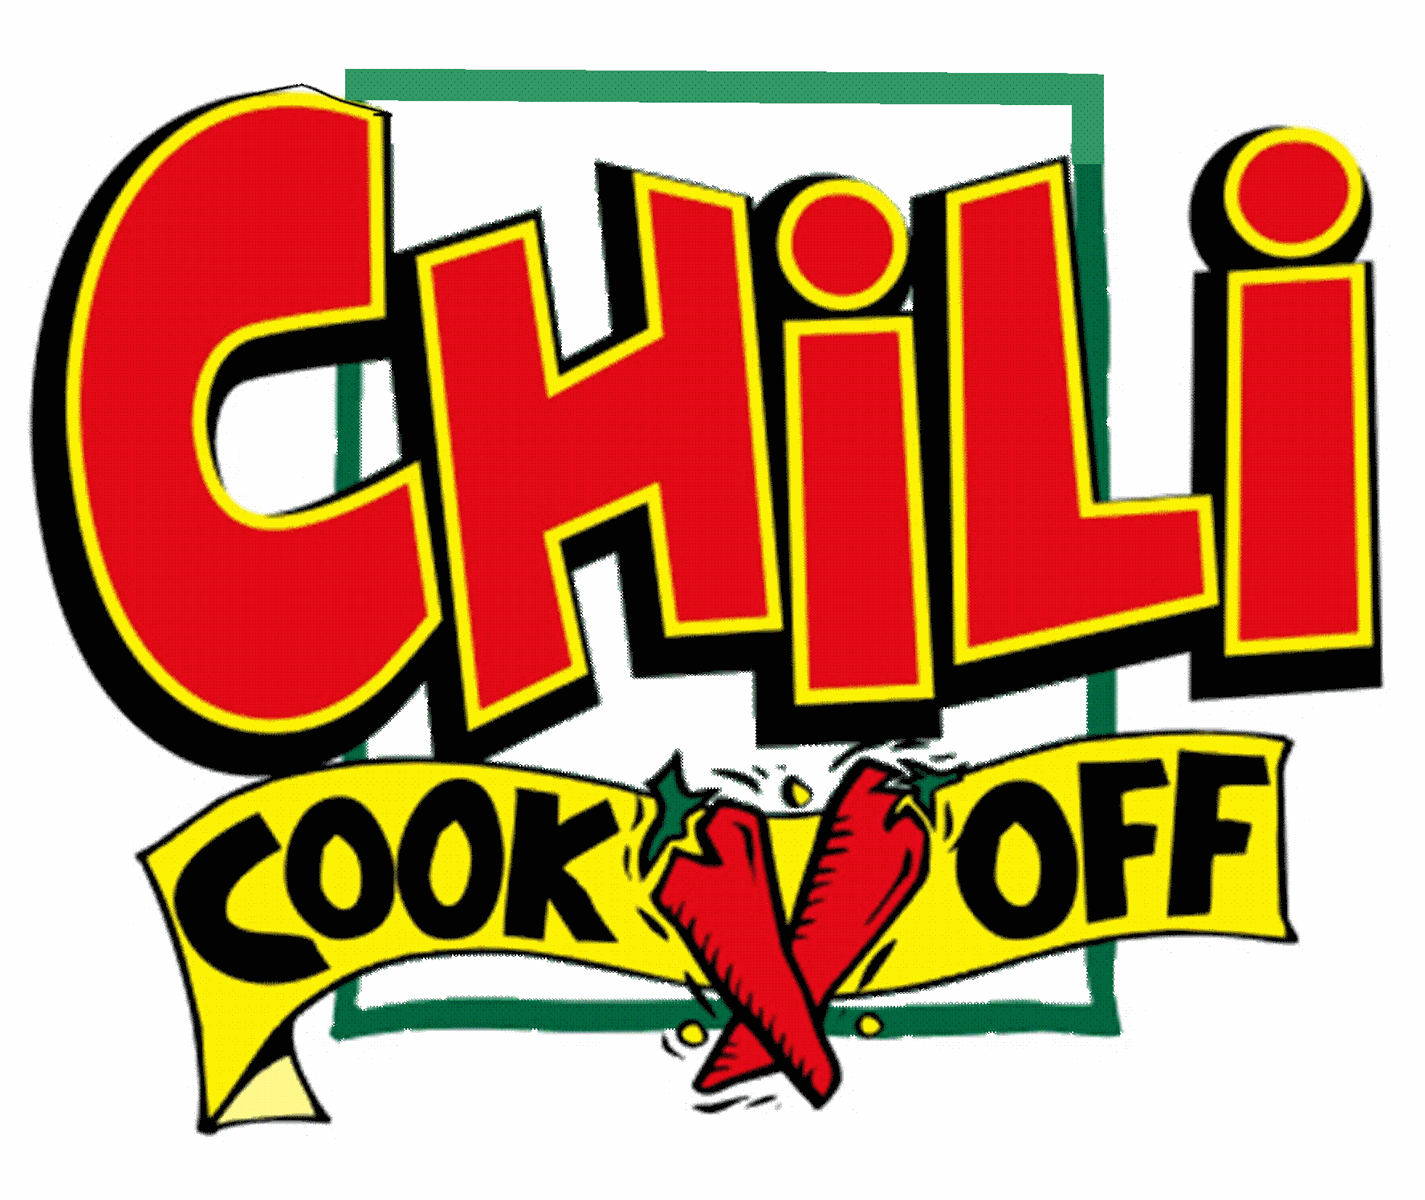 10 Chili Cook Off Clipart Free Cliparts That You Can Download To You